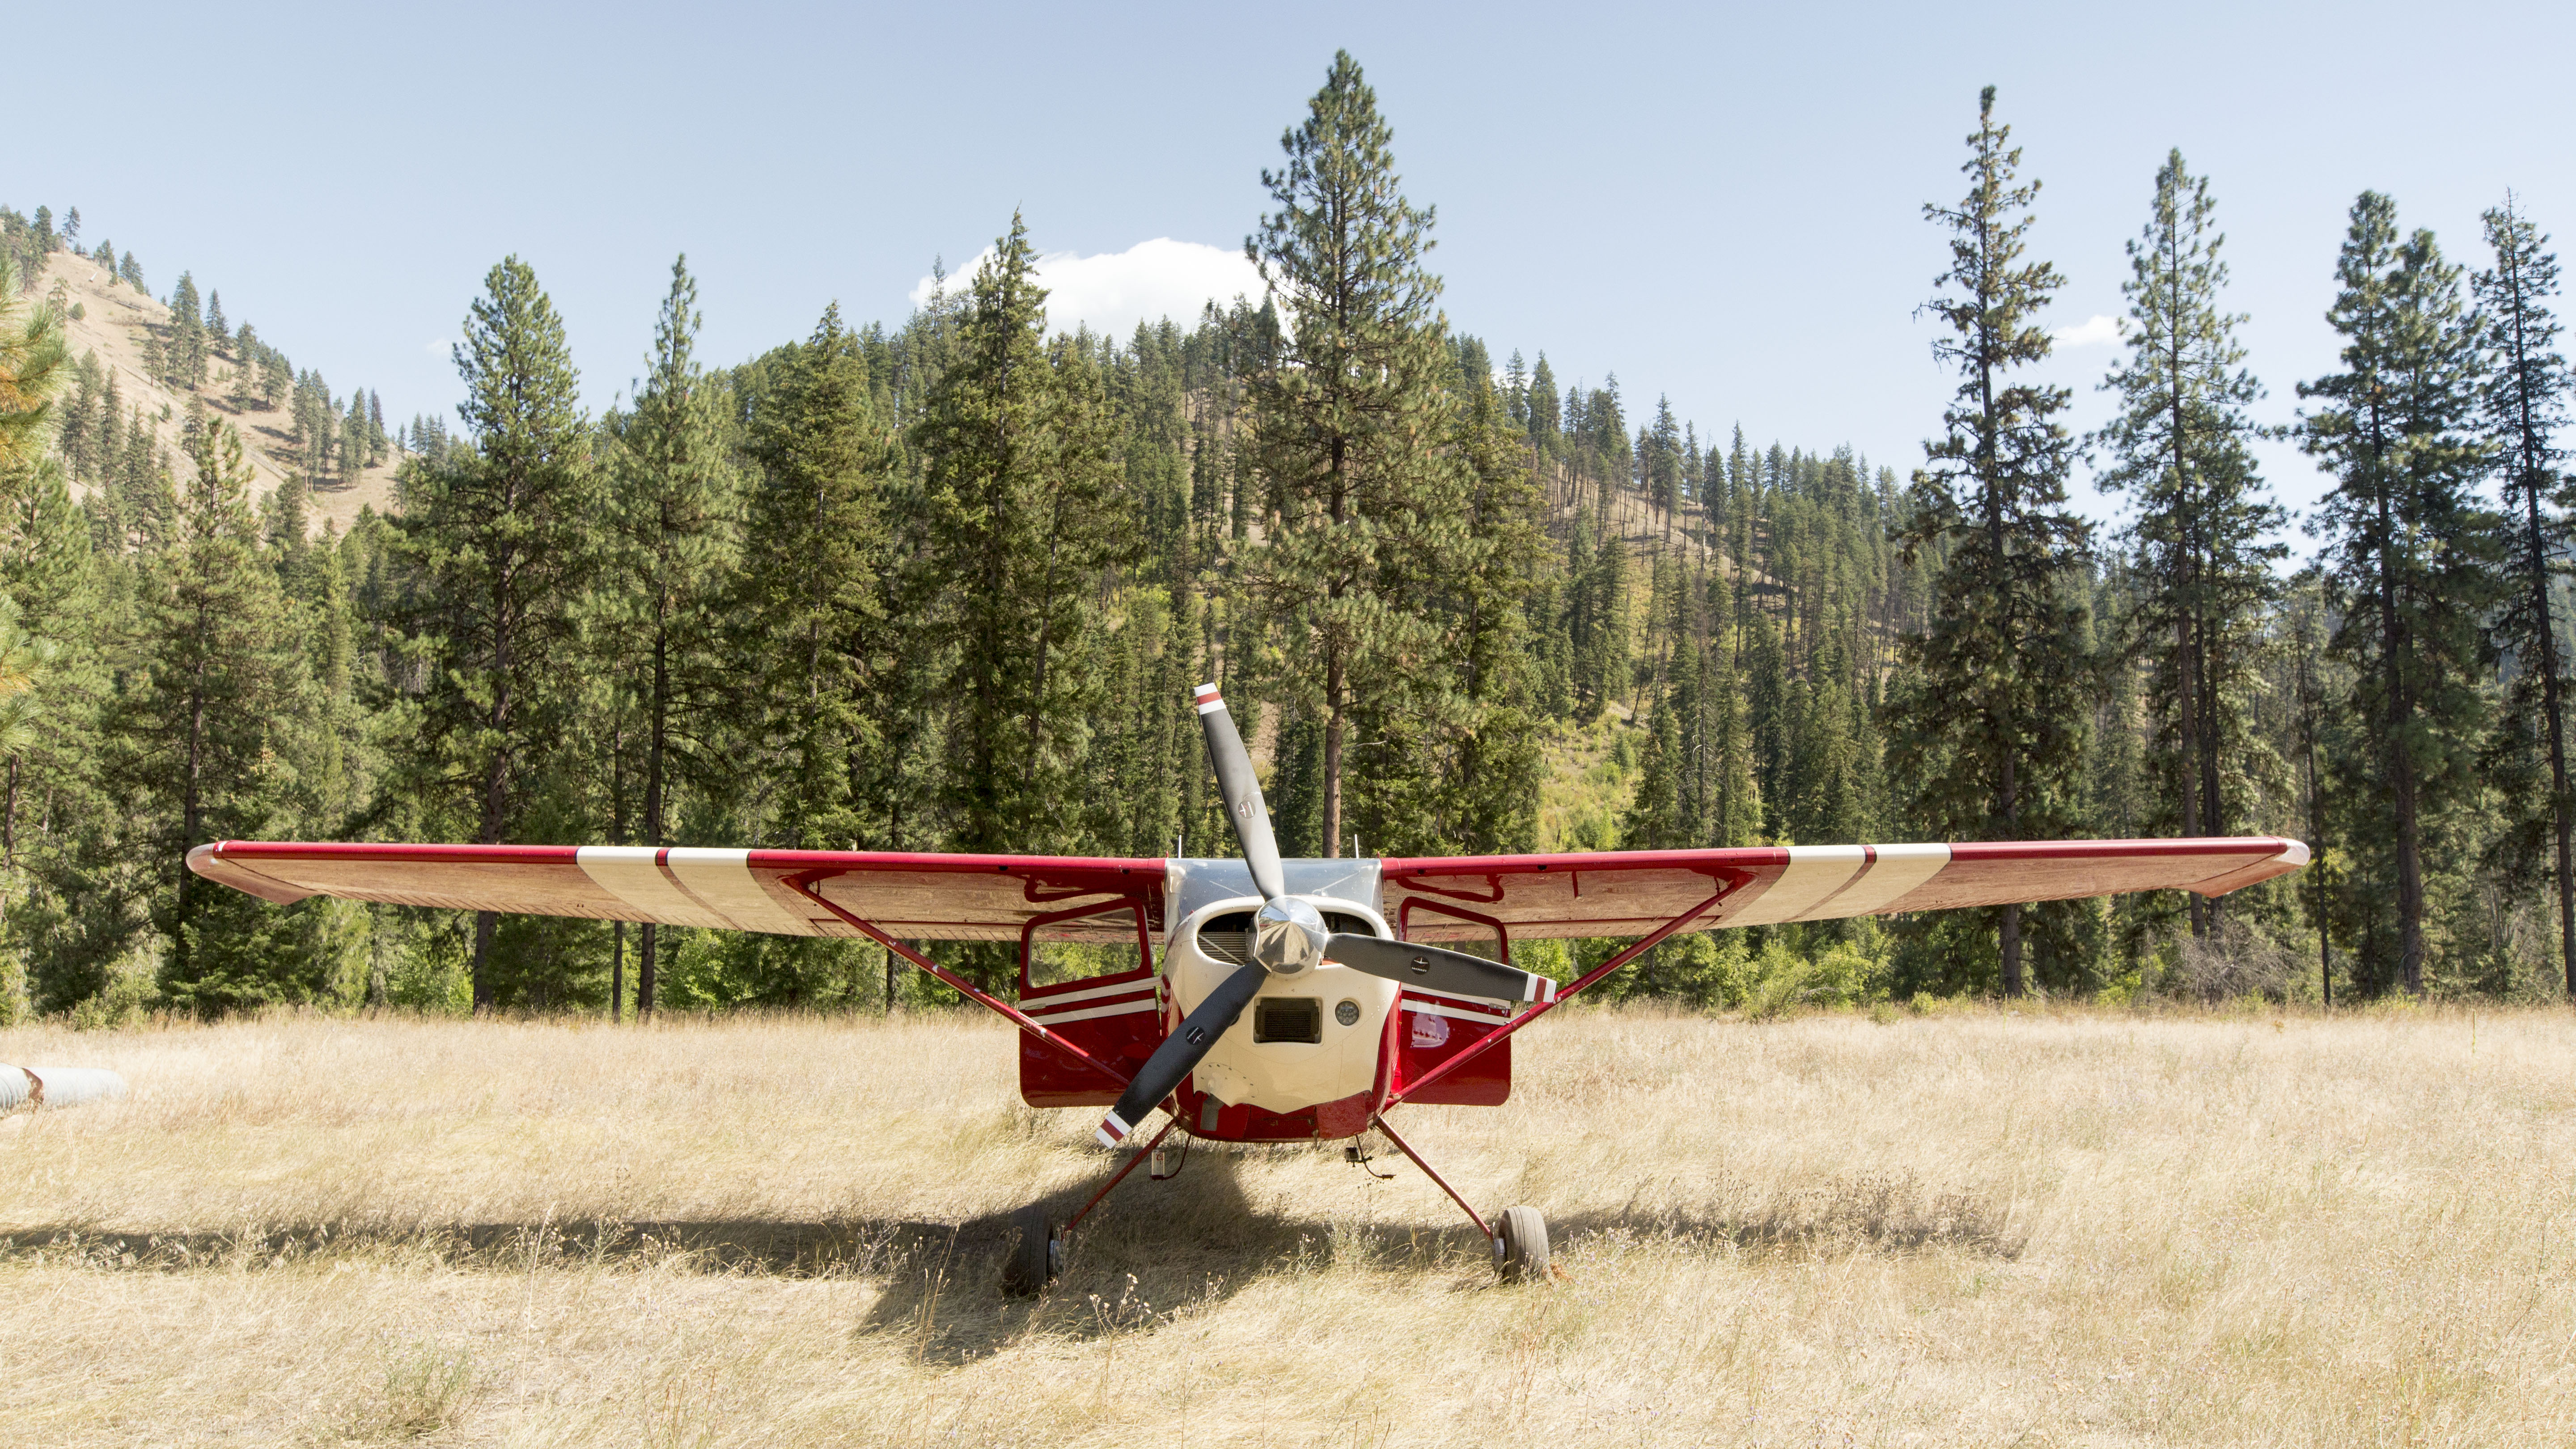 Cessna 180 Parked in the Idaho backcountry